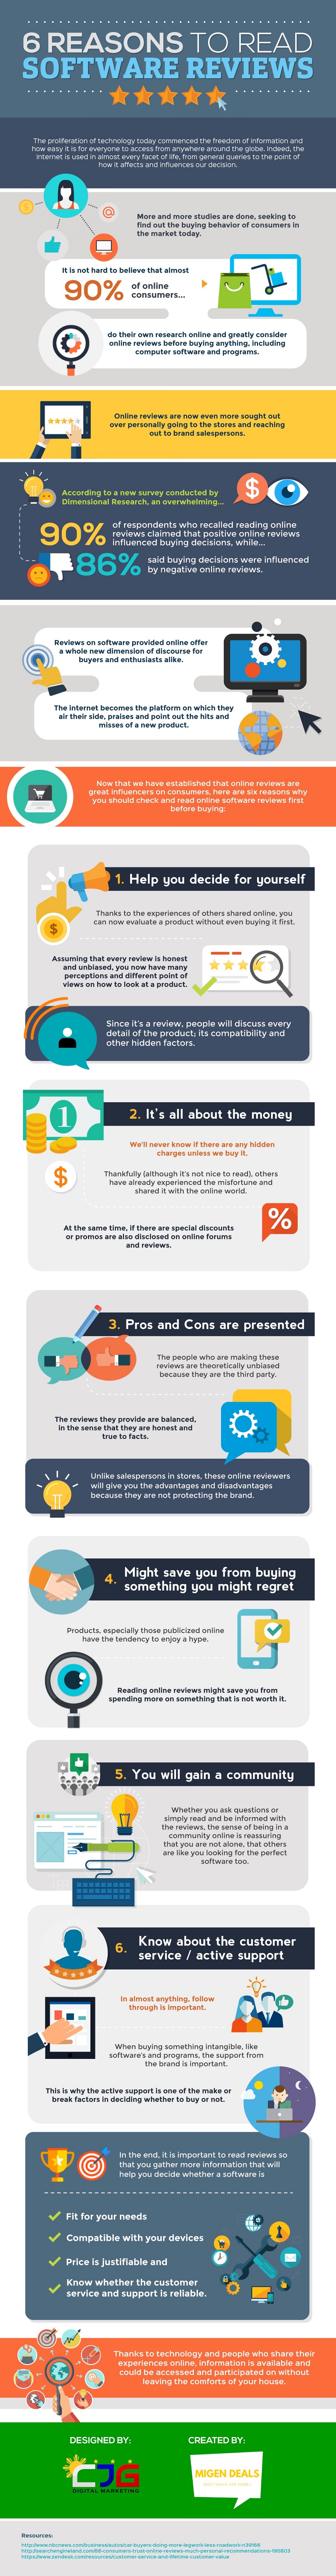 6 reasons to read software reviews infographic